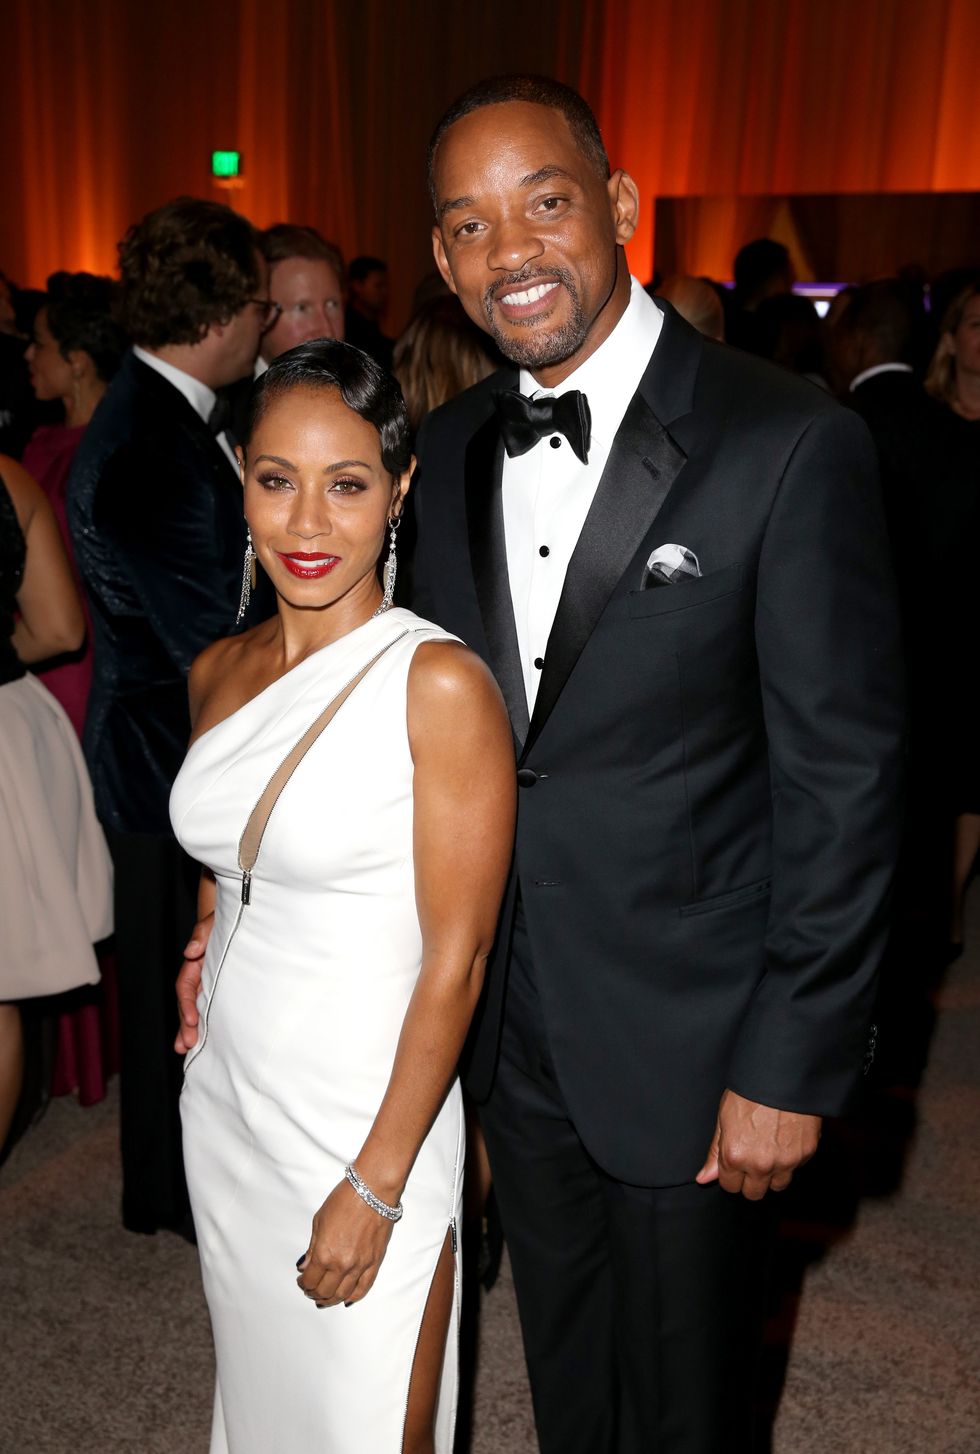 santa monica, ca   december 10  actress jada pinkett smith l and actor will smith attend the diamond ball ii with dusse and armand de brignac at the barker hanger on december 10, 2015 in santa monica, california  photo by joe scarnicigetty images for berk communications